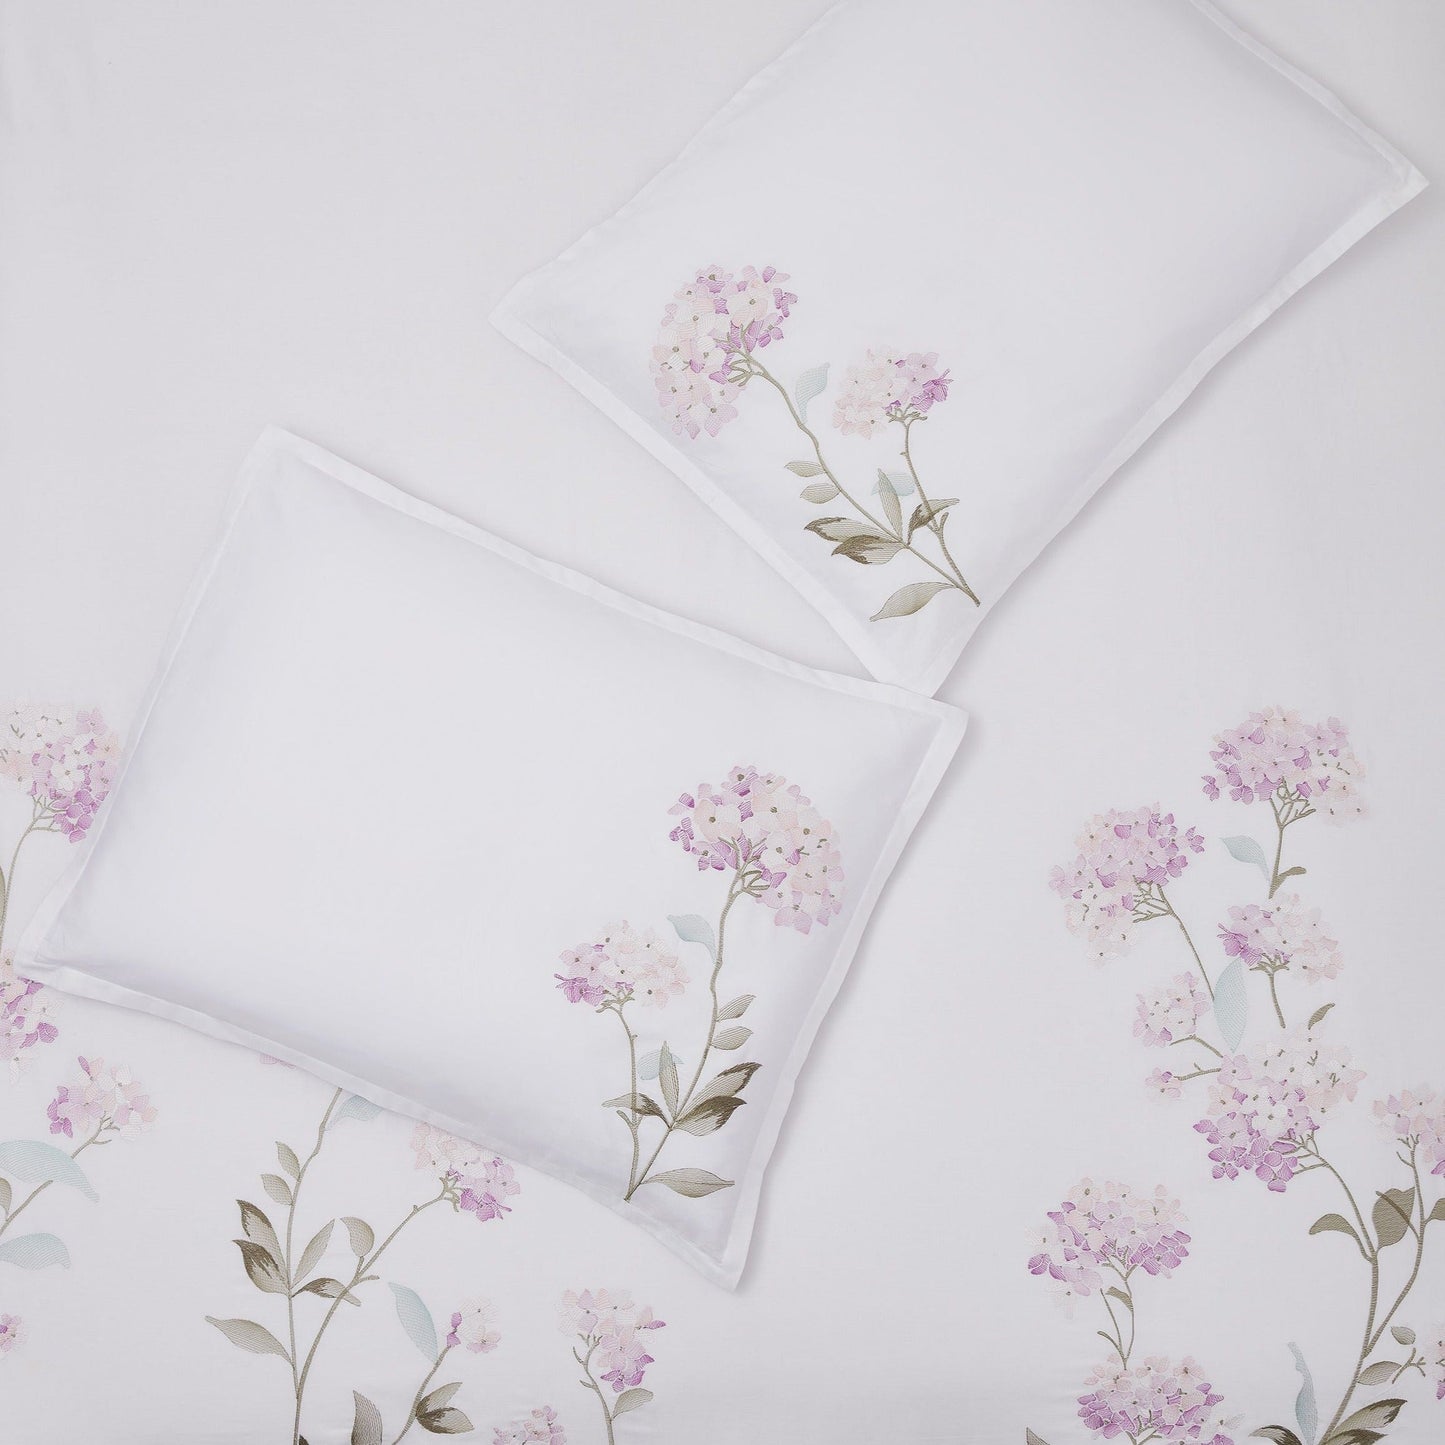 Hydrangea 100% Cotton Embroidered Duvet Cover Set